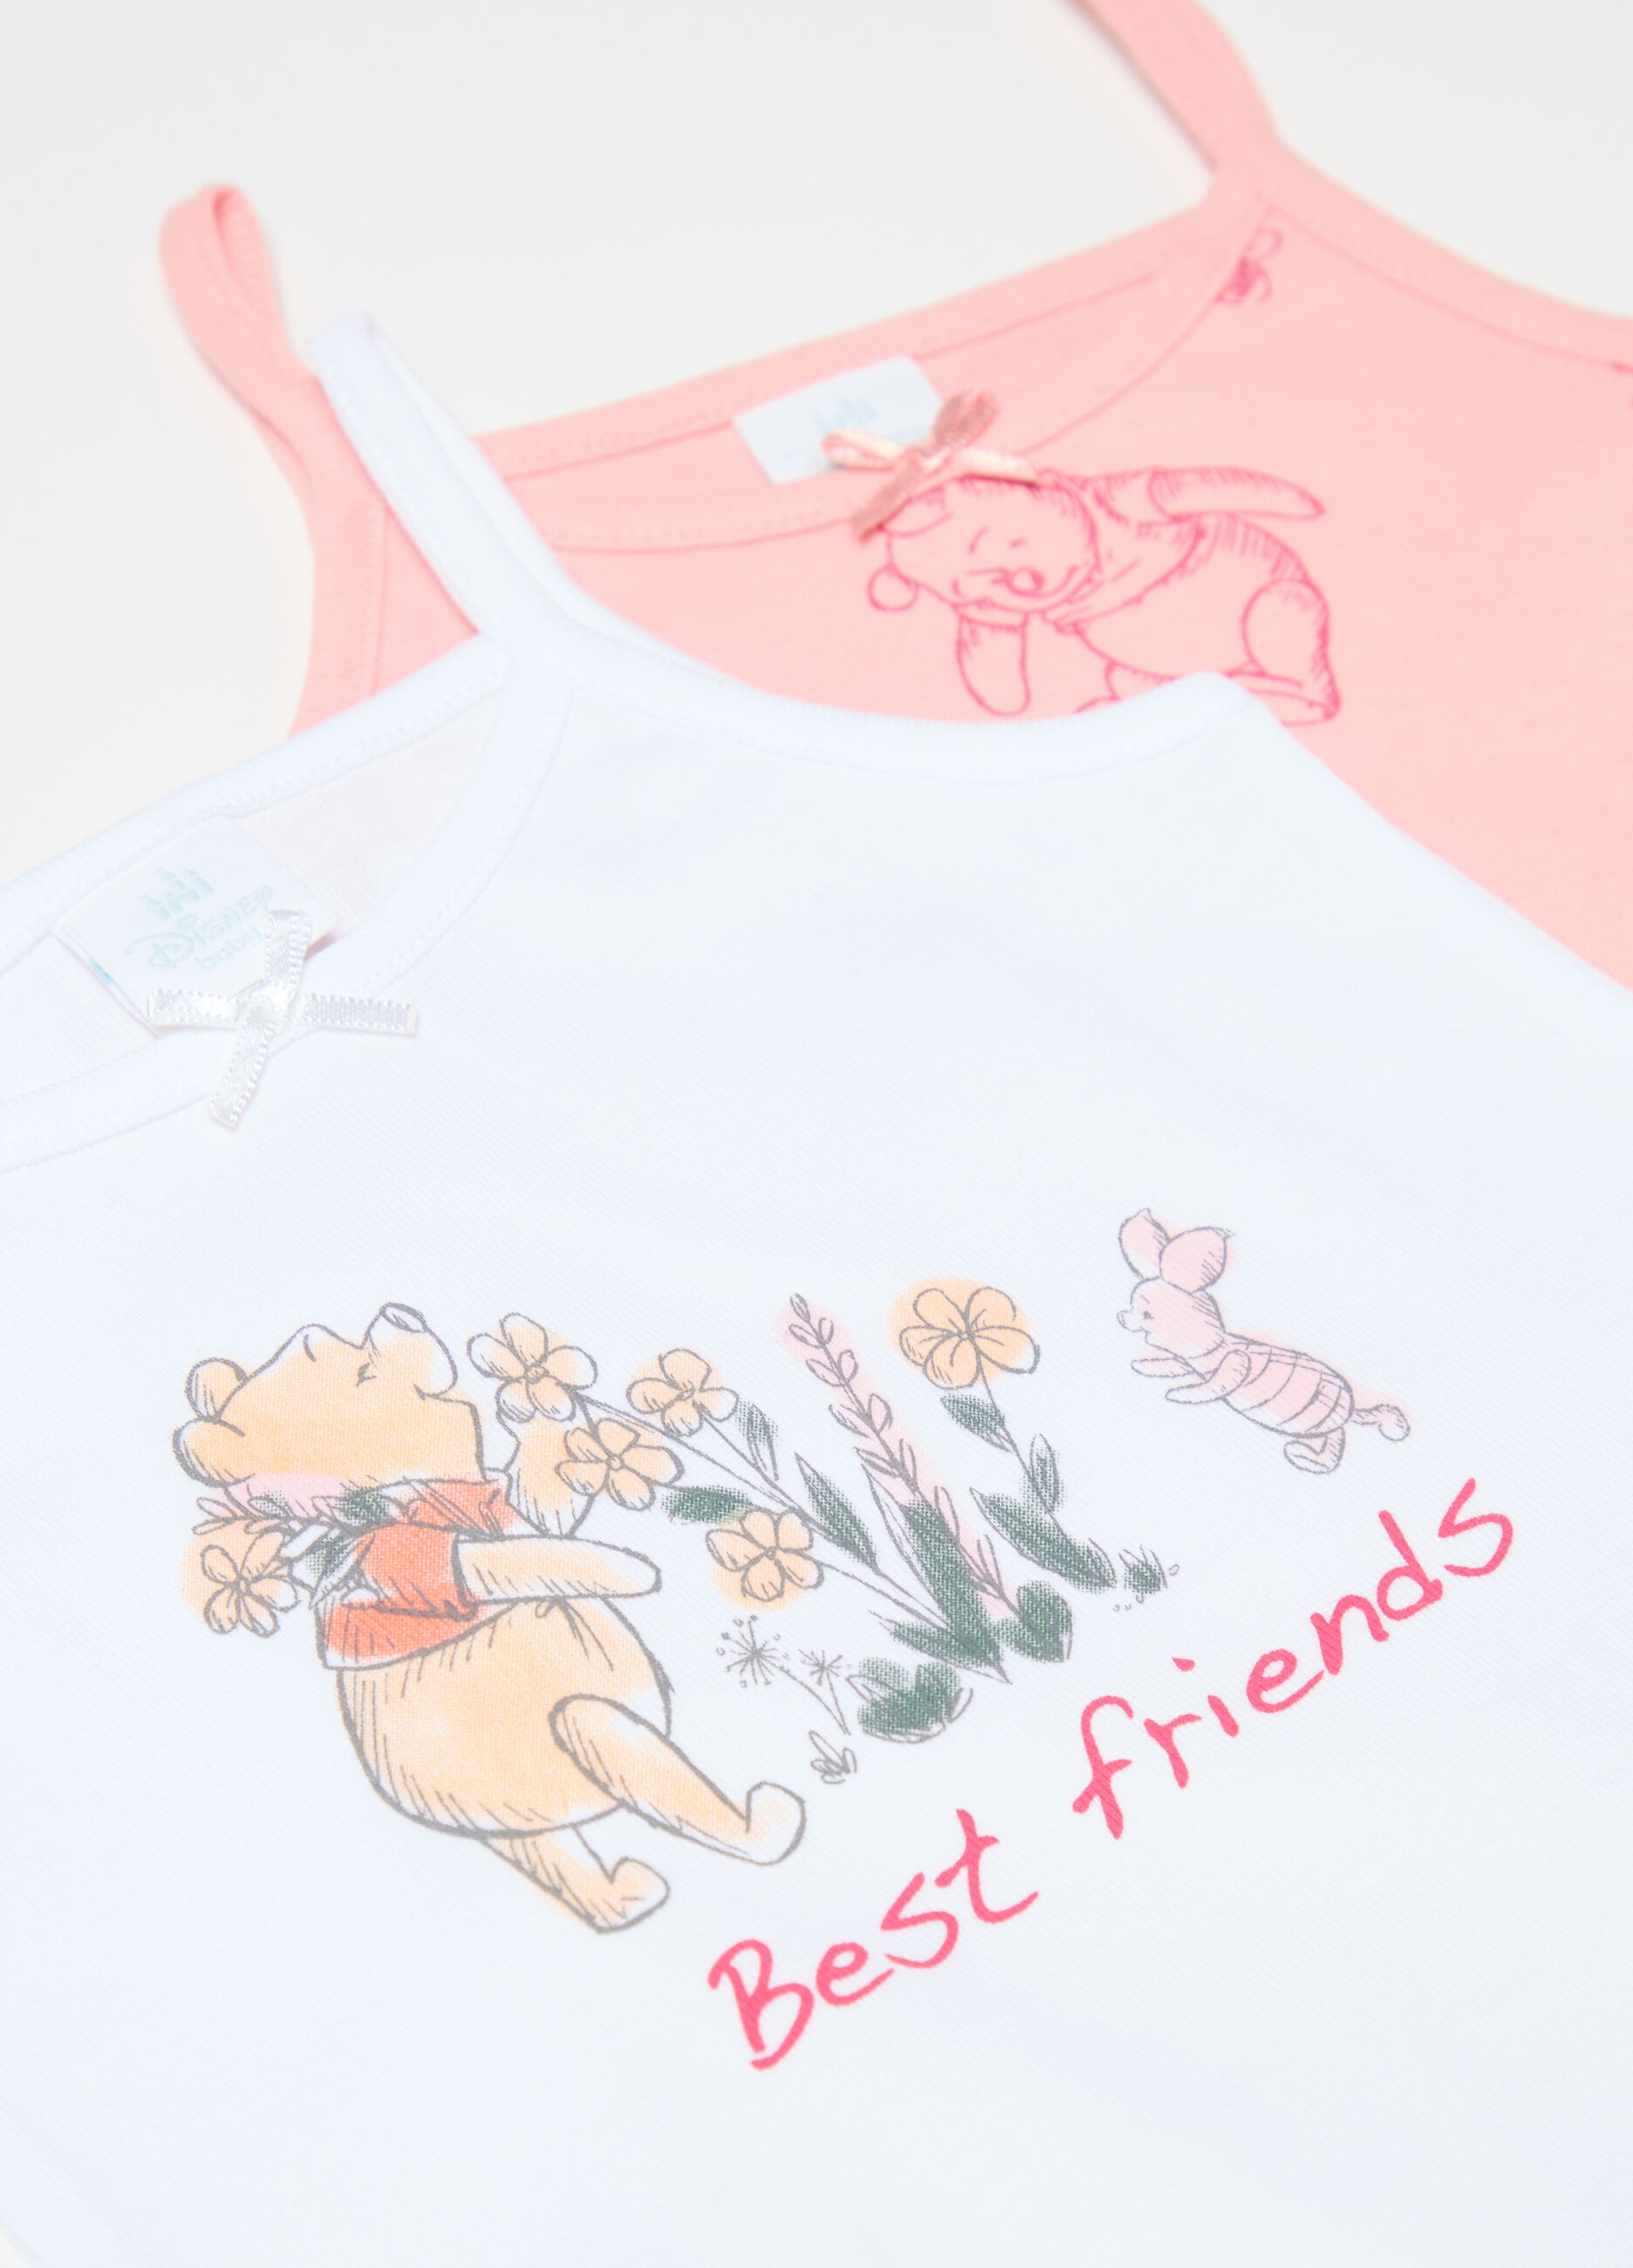 Winnie The Pooh two-pack organic cotton bodysuits